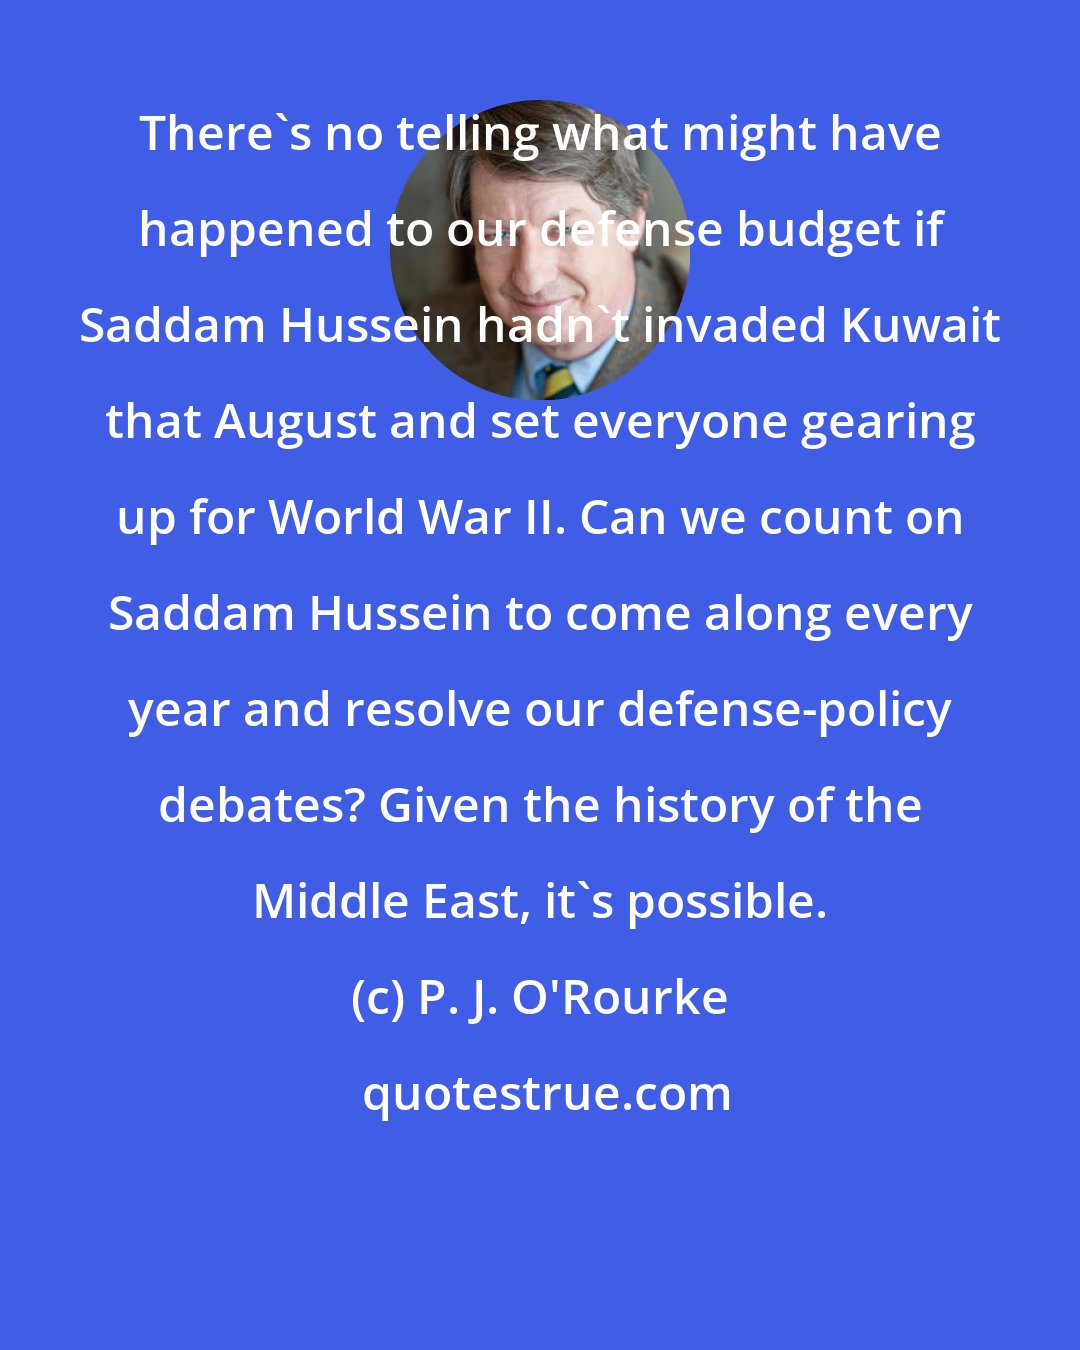 P. J. O'Rourke: There's no telling what might have happened to our defense budget if Saddam Hussein hadn't invaded Kuwait that August and set everyone gearing up for World War II. Can we count on Saddam Hussein to come along every year and resolve our defense-policy debates? Given the history of the Middle East, it's possible.